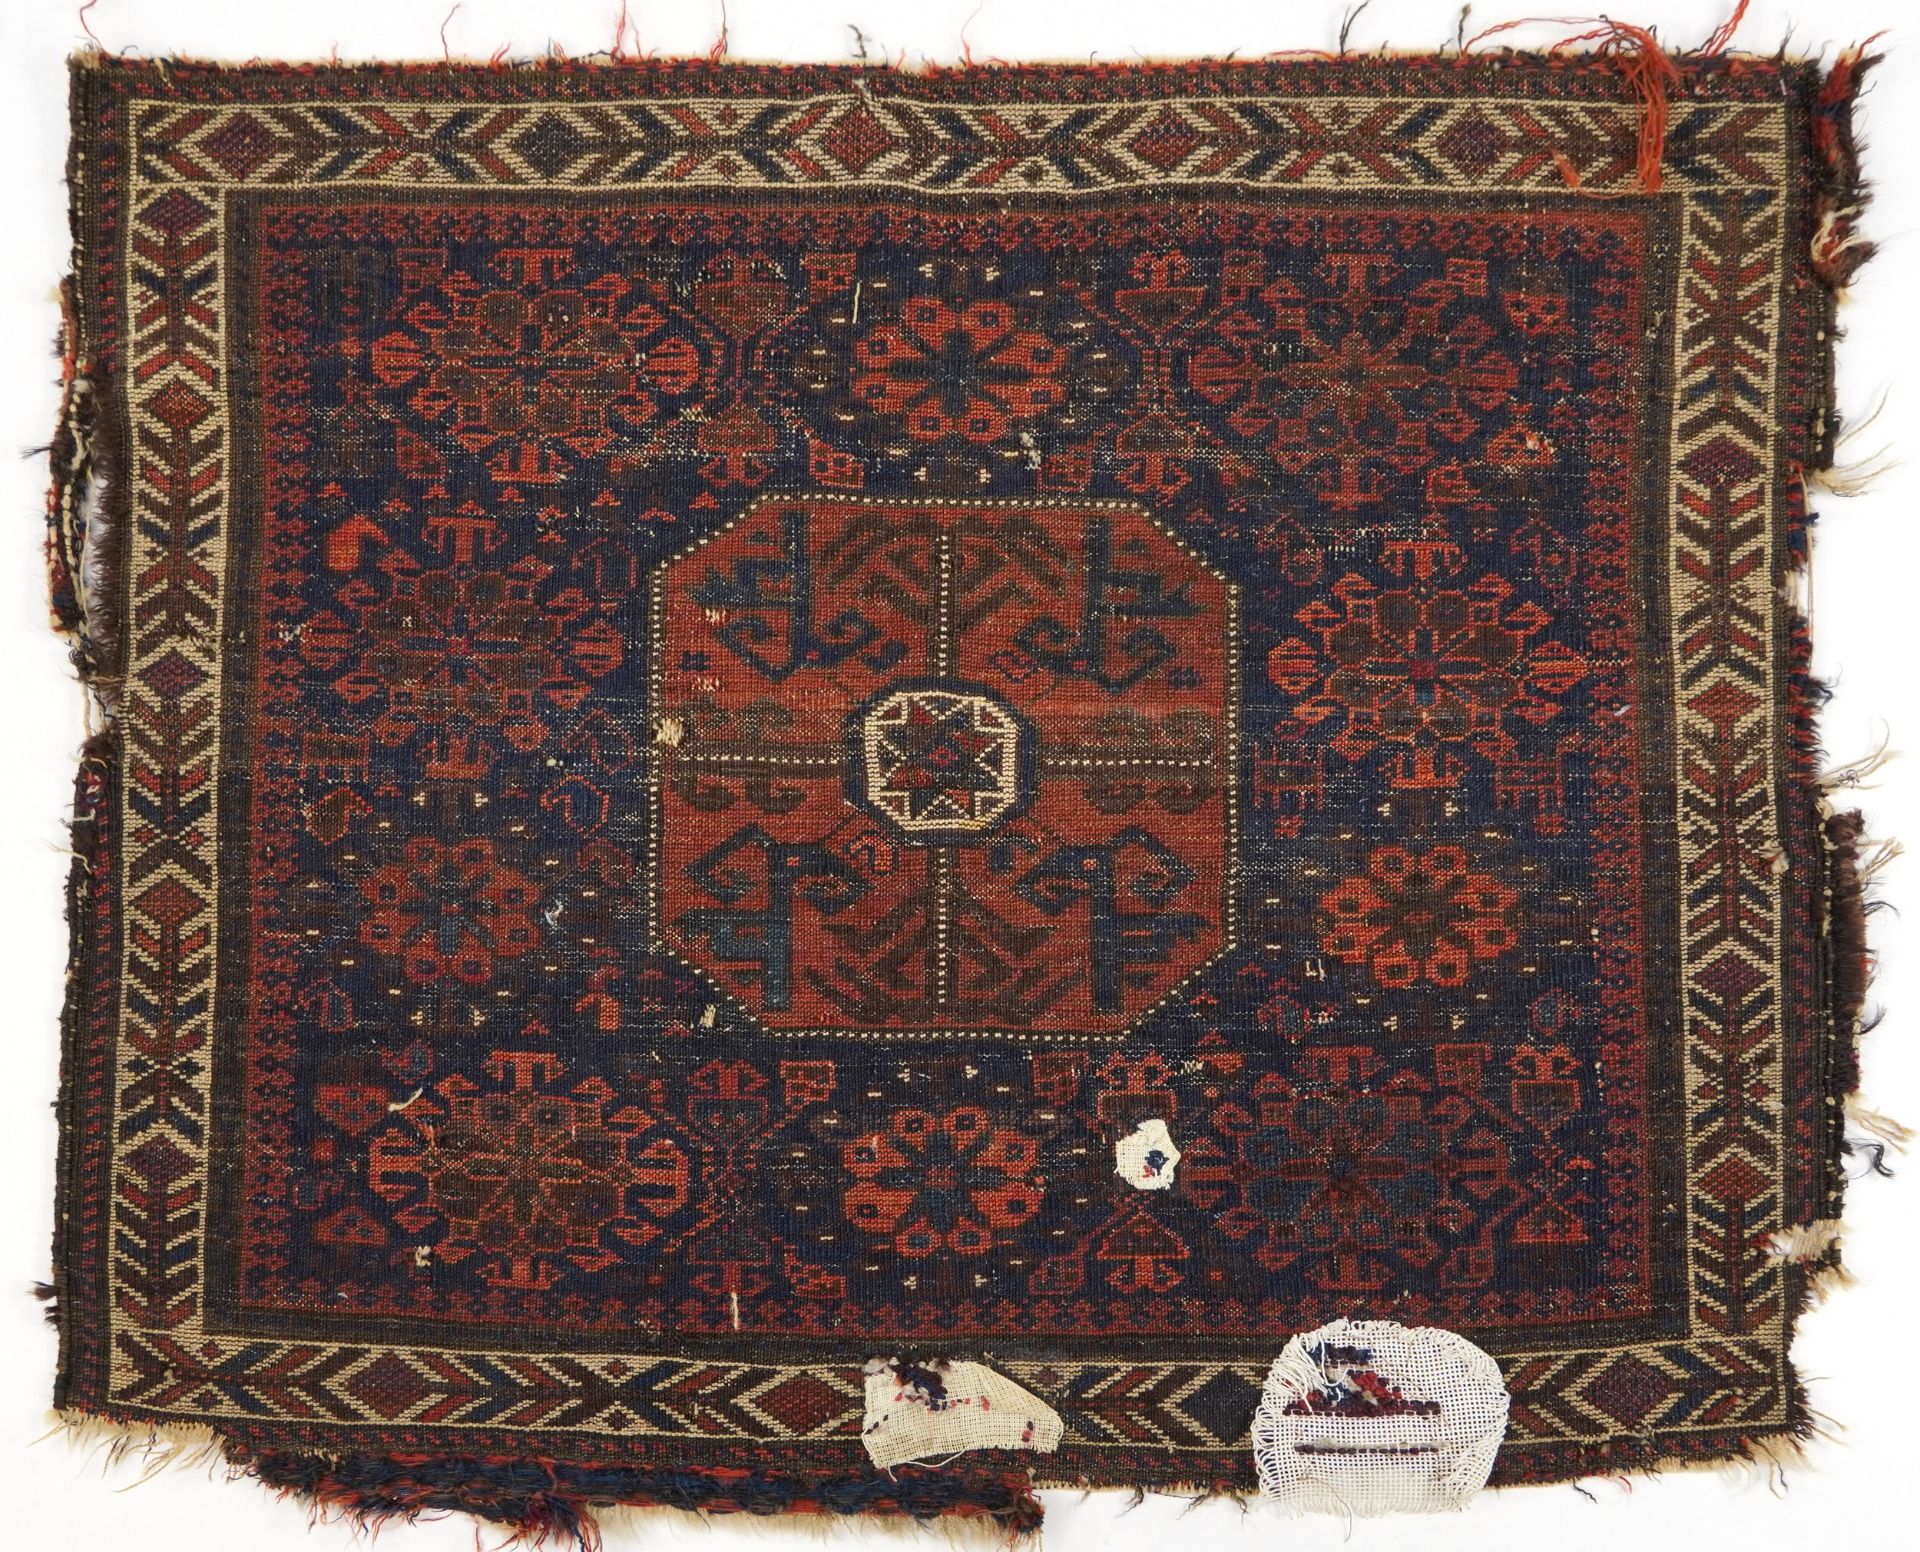 Afghan red and blue ground Belutch rug with all over geometric design, 86cm x 76cm - Image 3 of 3